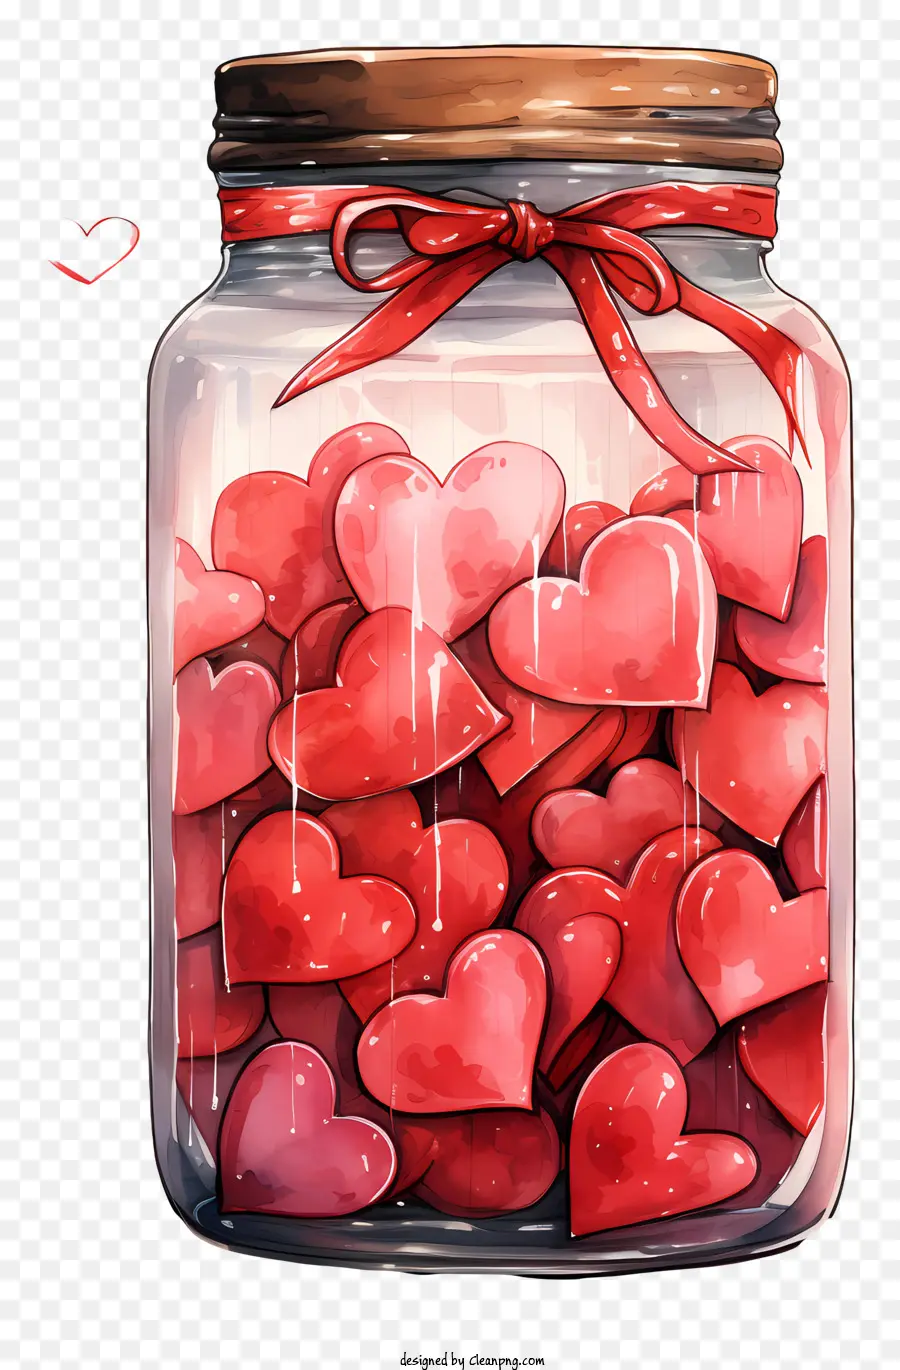 mason jar valentine's day candy heart-shaped candies gift ideas red ribbon decorations